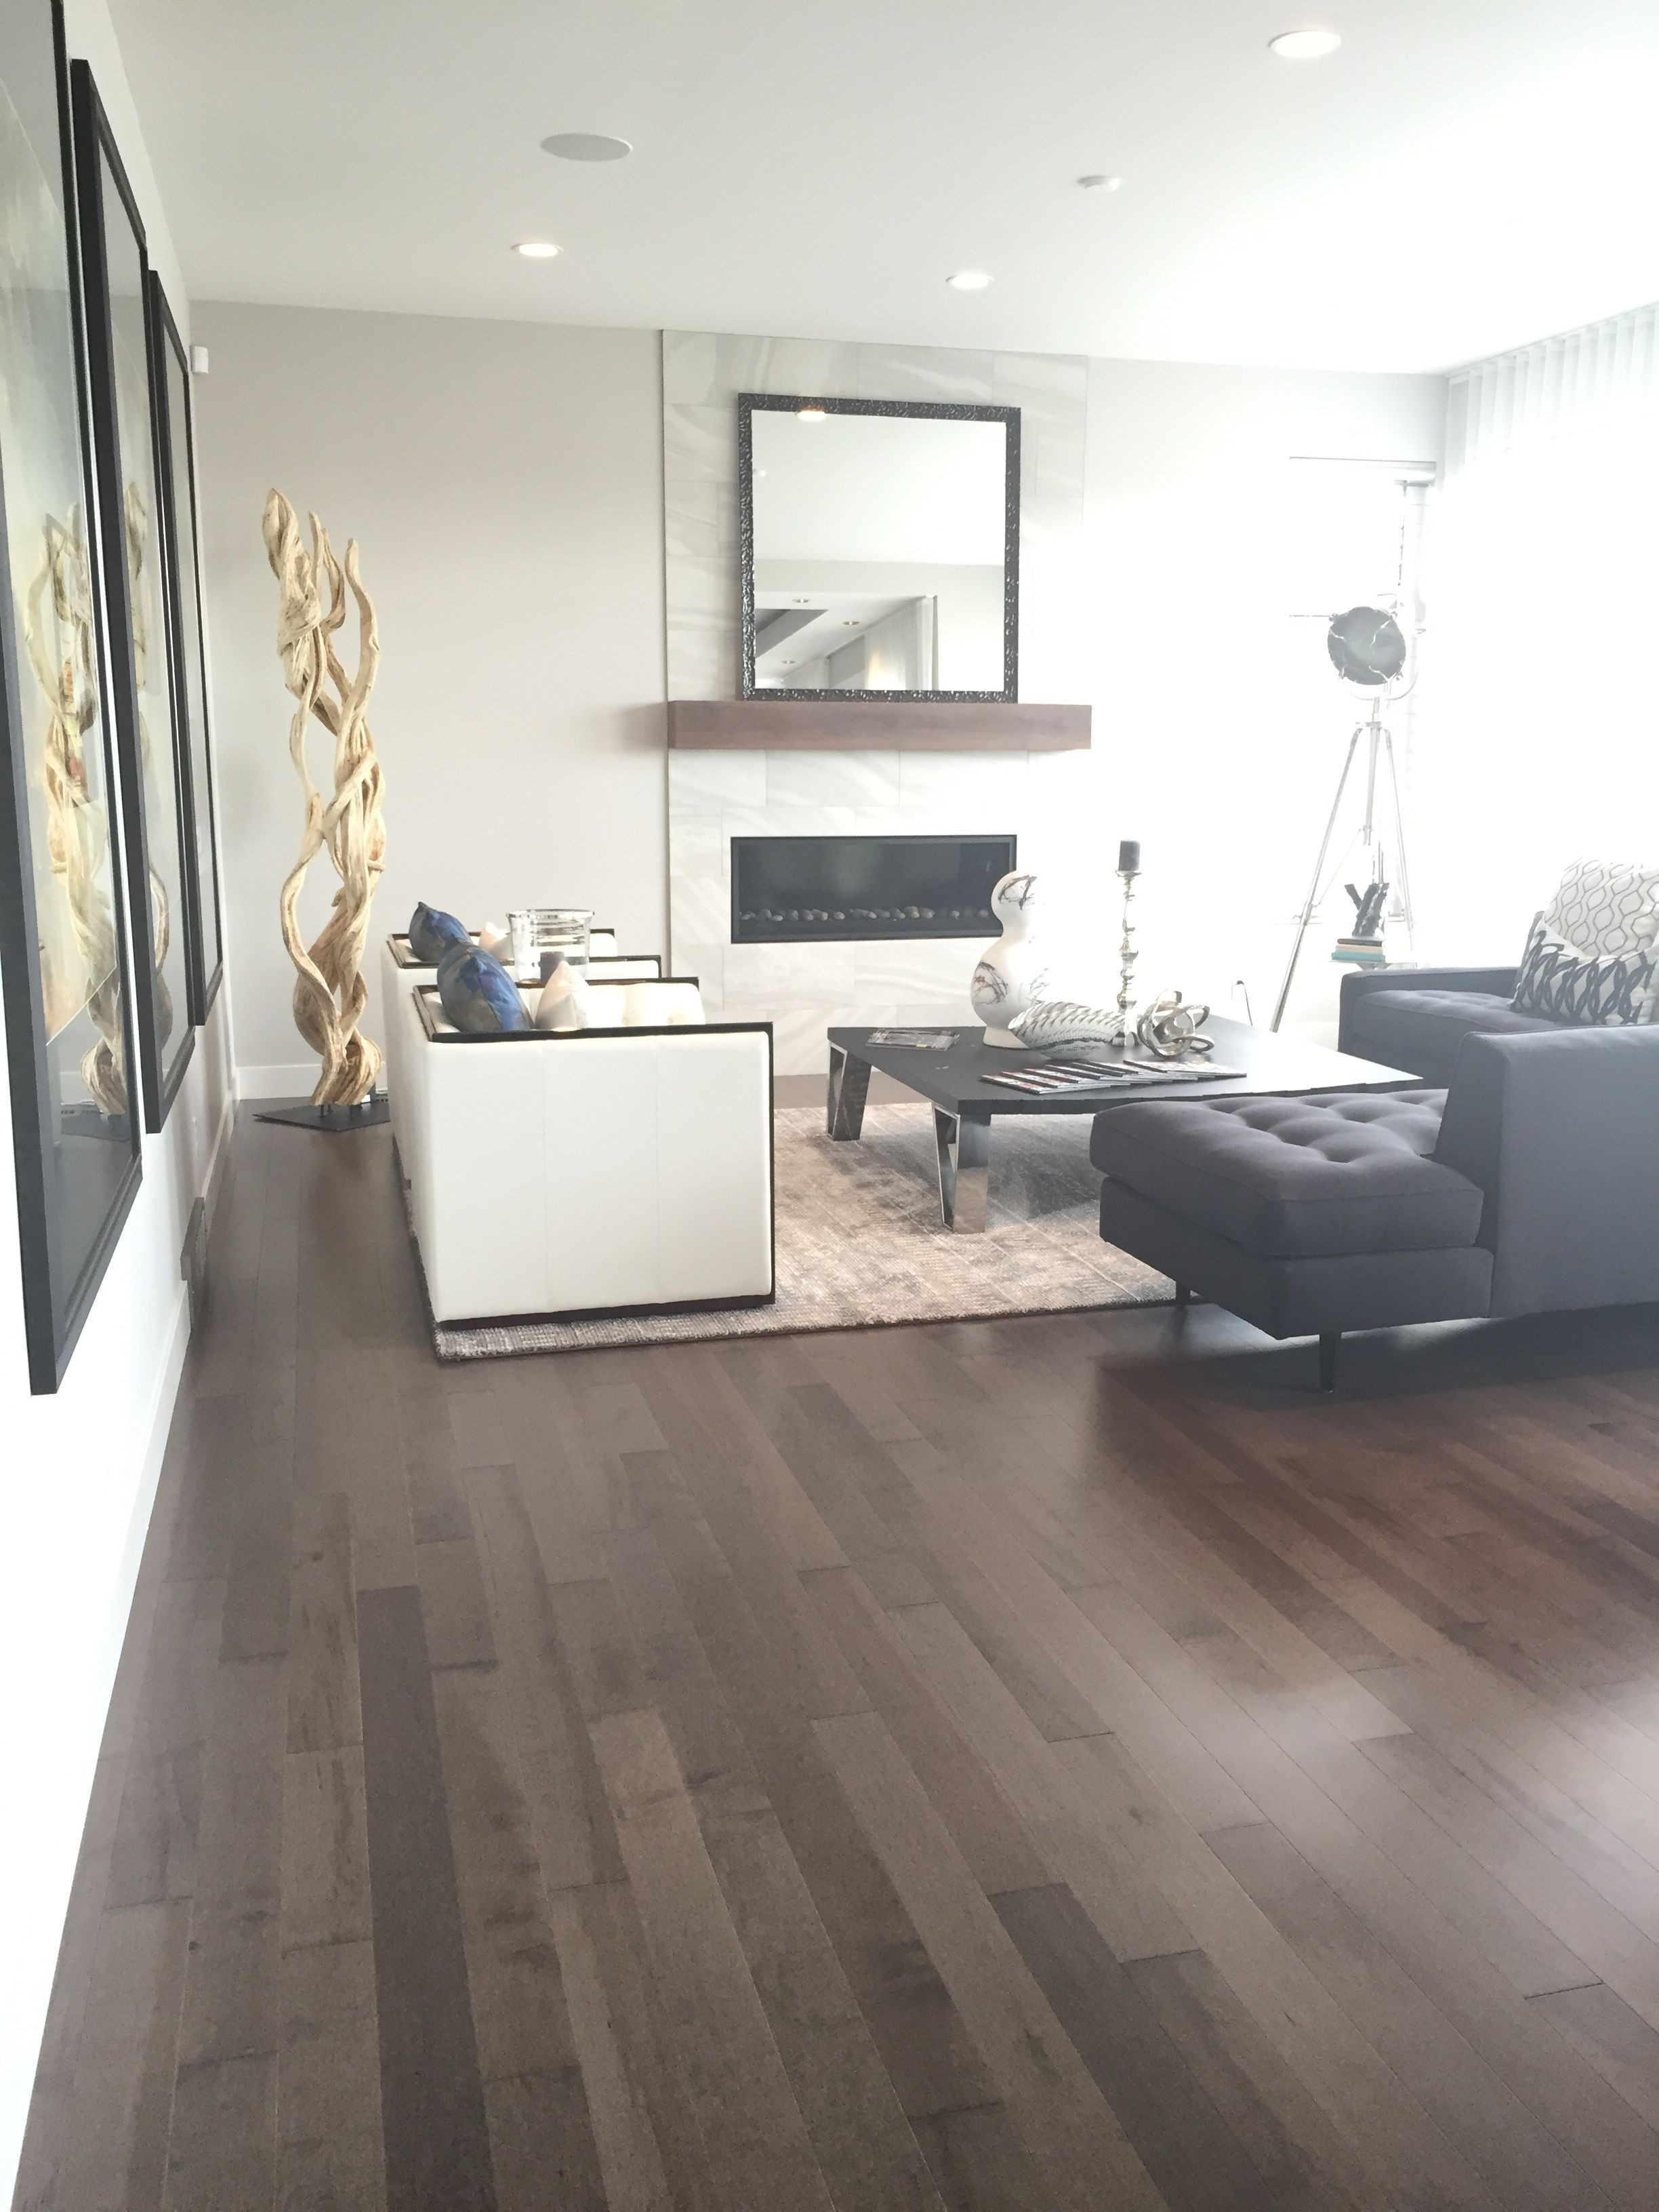 Hardwood Floor Trends Of Smoky Grey Essential Hard Maple Tradition Lauzon Hardwood Throughout Beautiful Living Room From the Cantata Showhome Featuring Lauzons Smokey Grey Hard Maple Hardwood Flooring From the Essential Collection